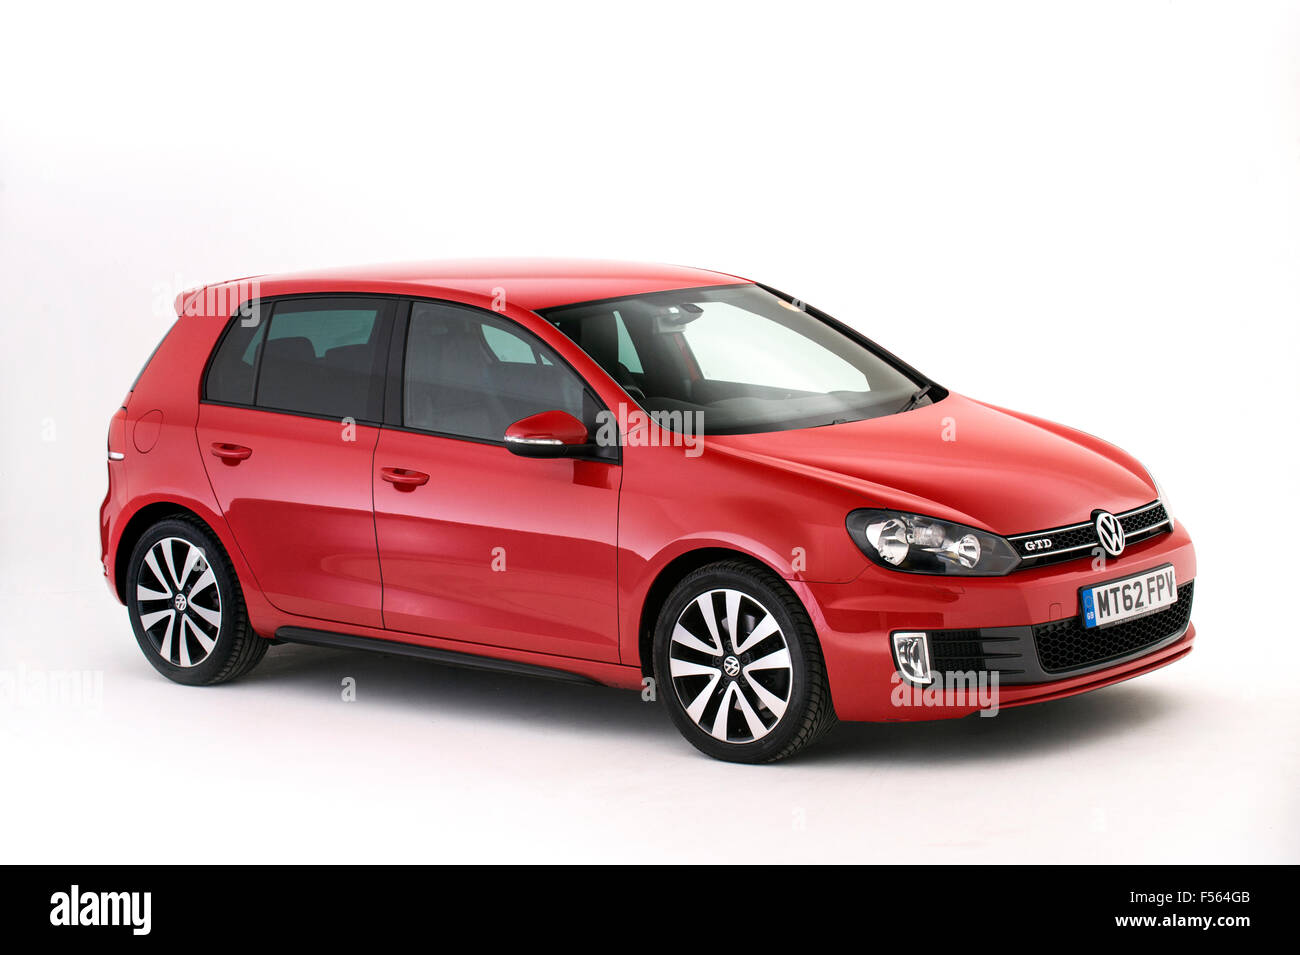 Vw Golf Mk6 High Resolution Stock Photography and Images - Alamy